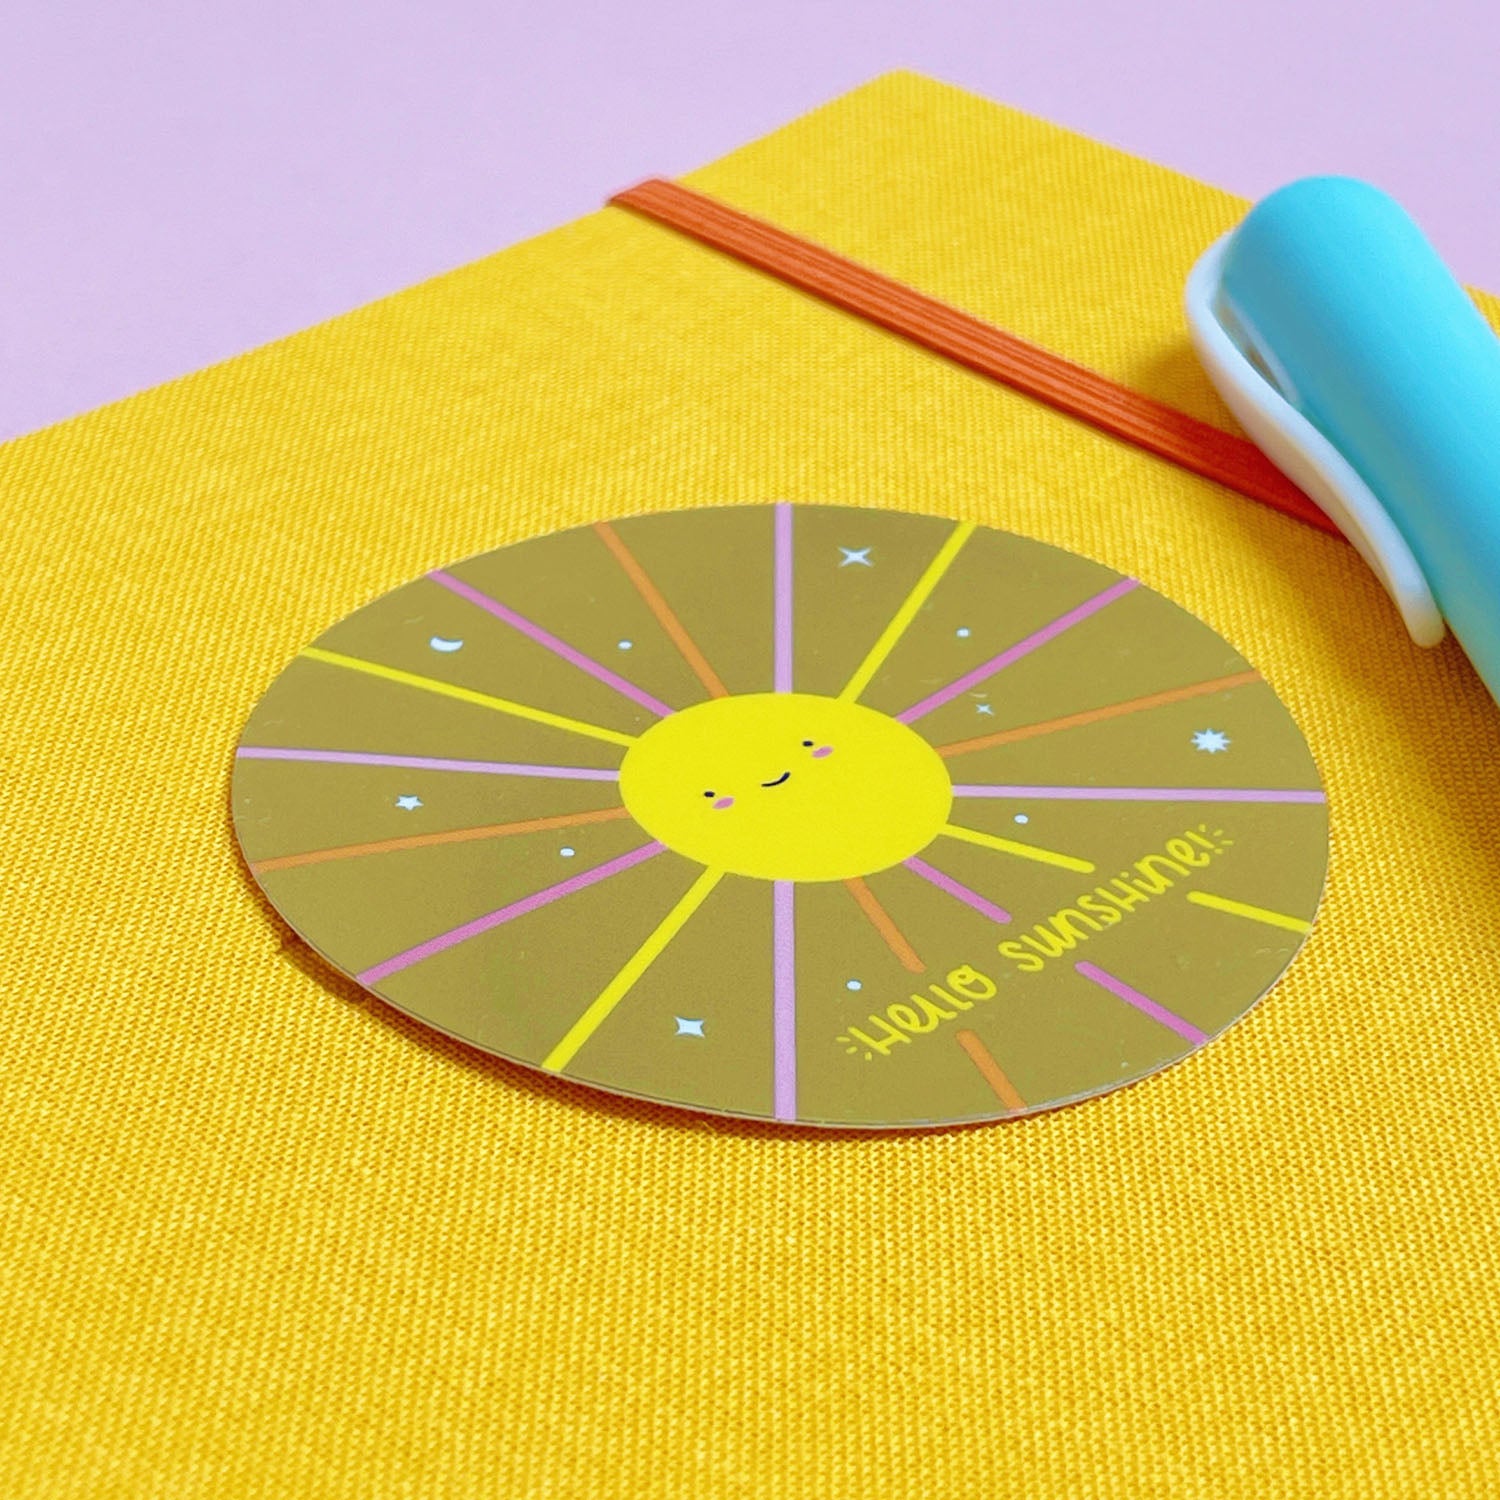 A shiny mirror effect gold sticker featuring a smiling sun lying on top of a yellow journal on a pink background